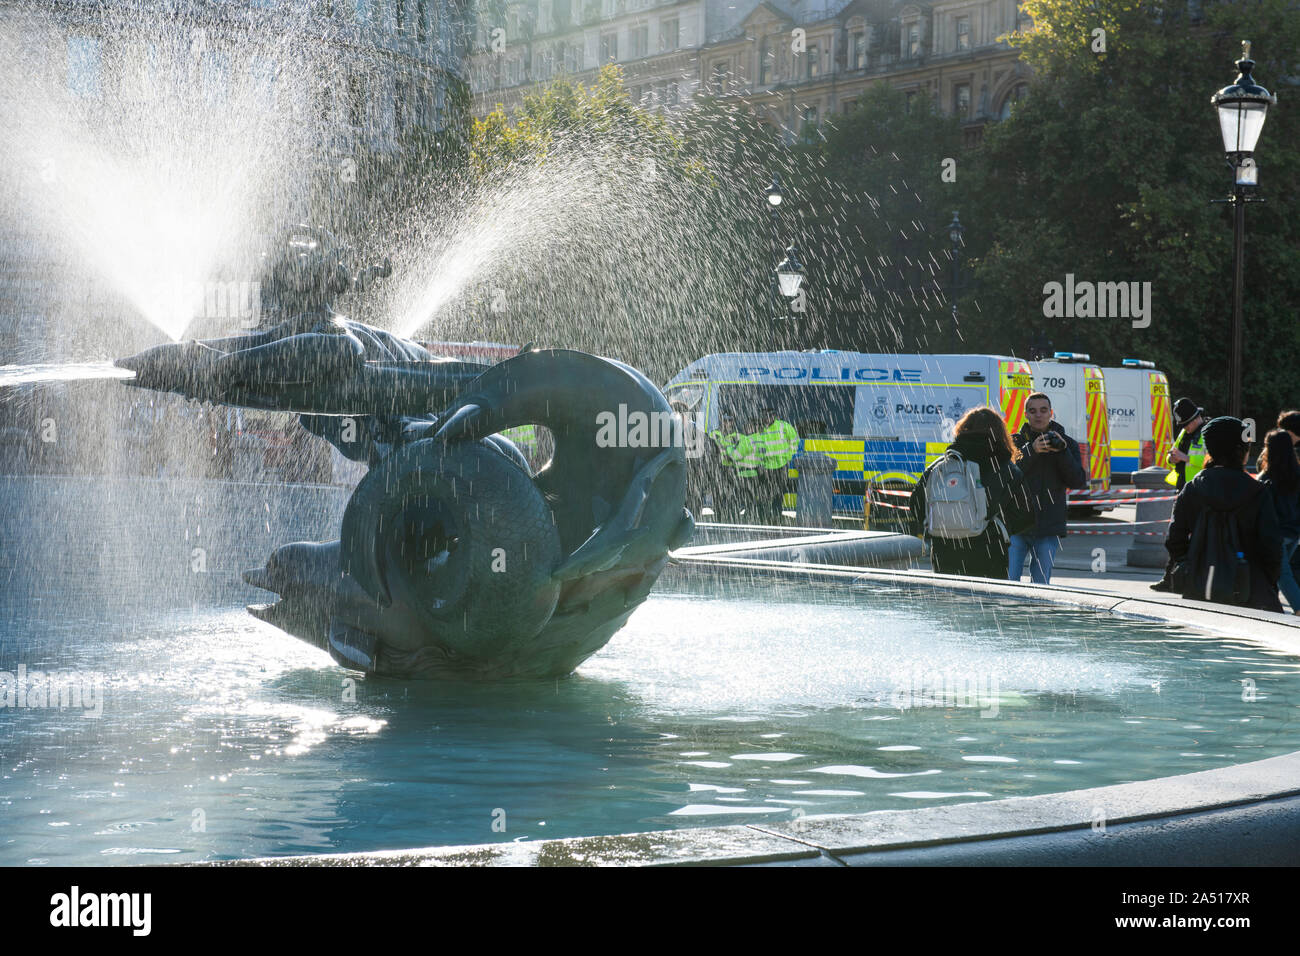 Trafalgar Square, London, UK. 17th October 2019. Large early morning police presence in Trafalgar Square after Extinction Rebellion climate change protesters were stopped from gathering in the area. Vans parked from Essex Police, Kent Police and Norfolk Constabulary. Credit: Malcolm Park/Alamy Live News. Stock Photo